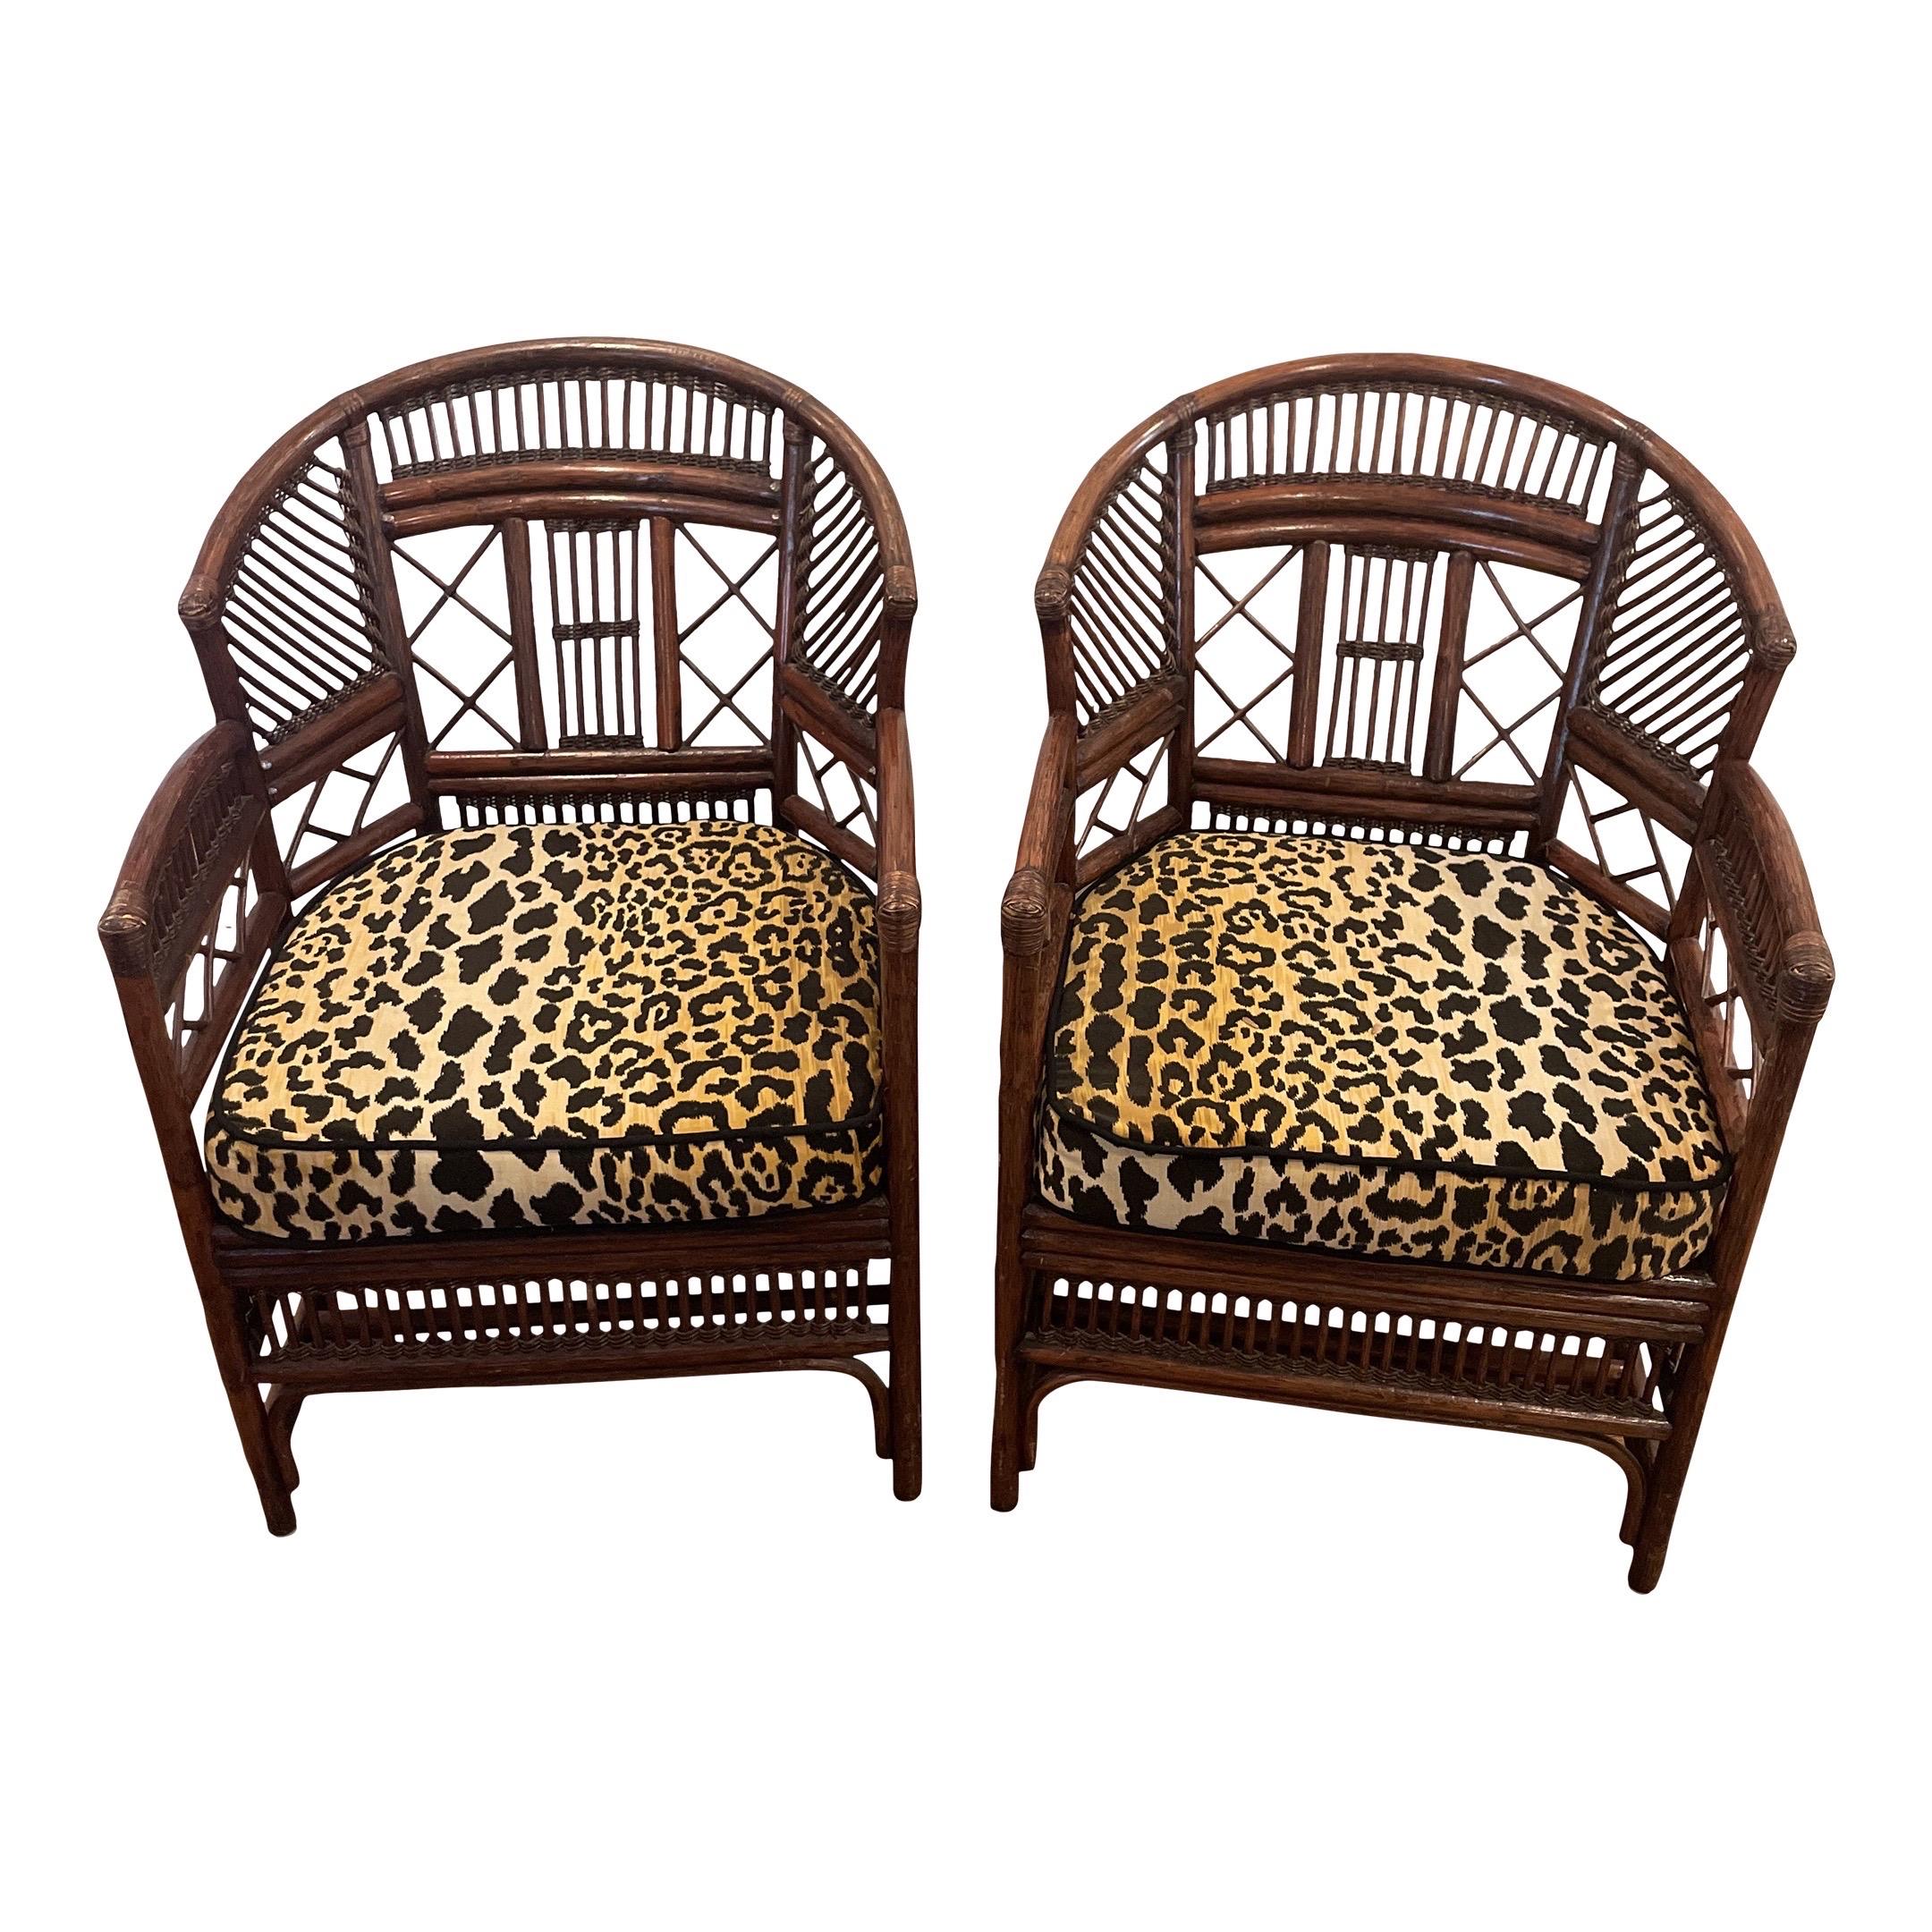 Unknown Vintage Brighton Style Chairs With Custom Leopard Print Cushions- Pair